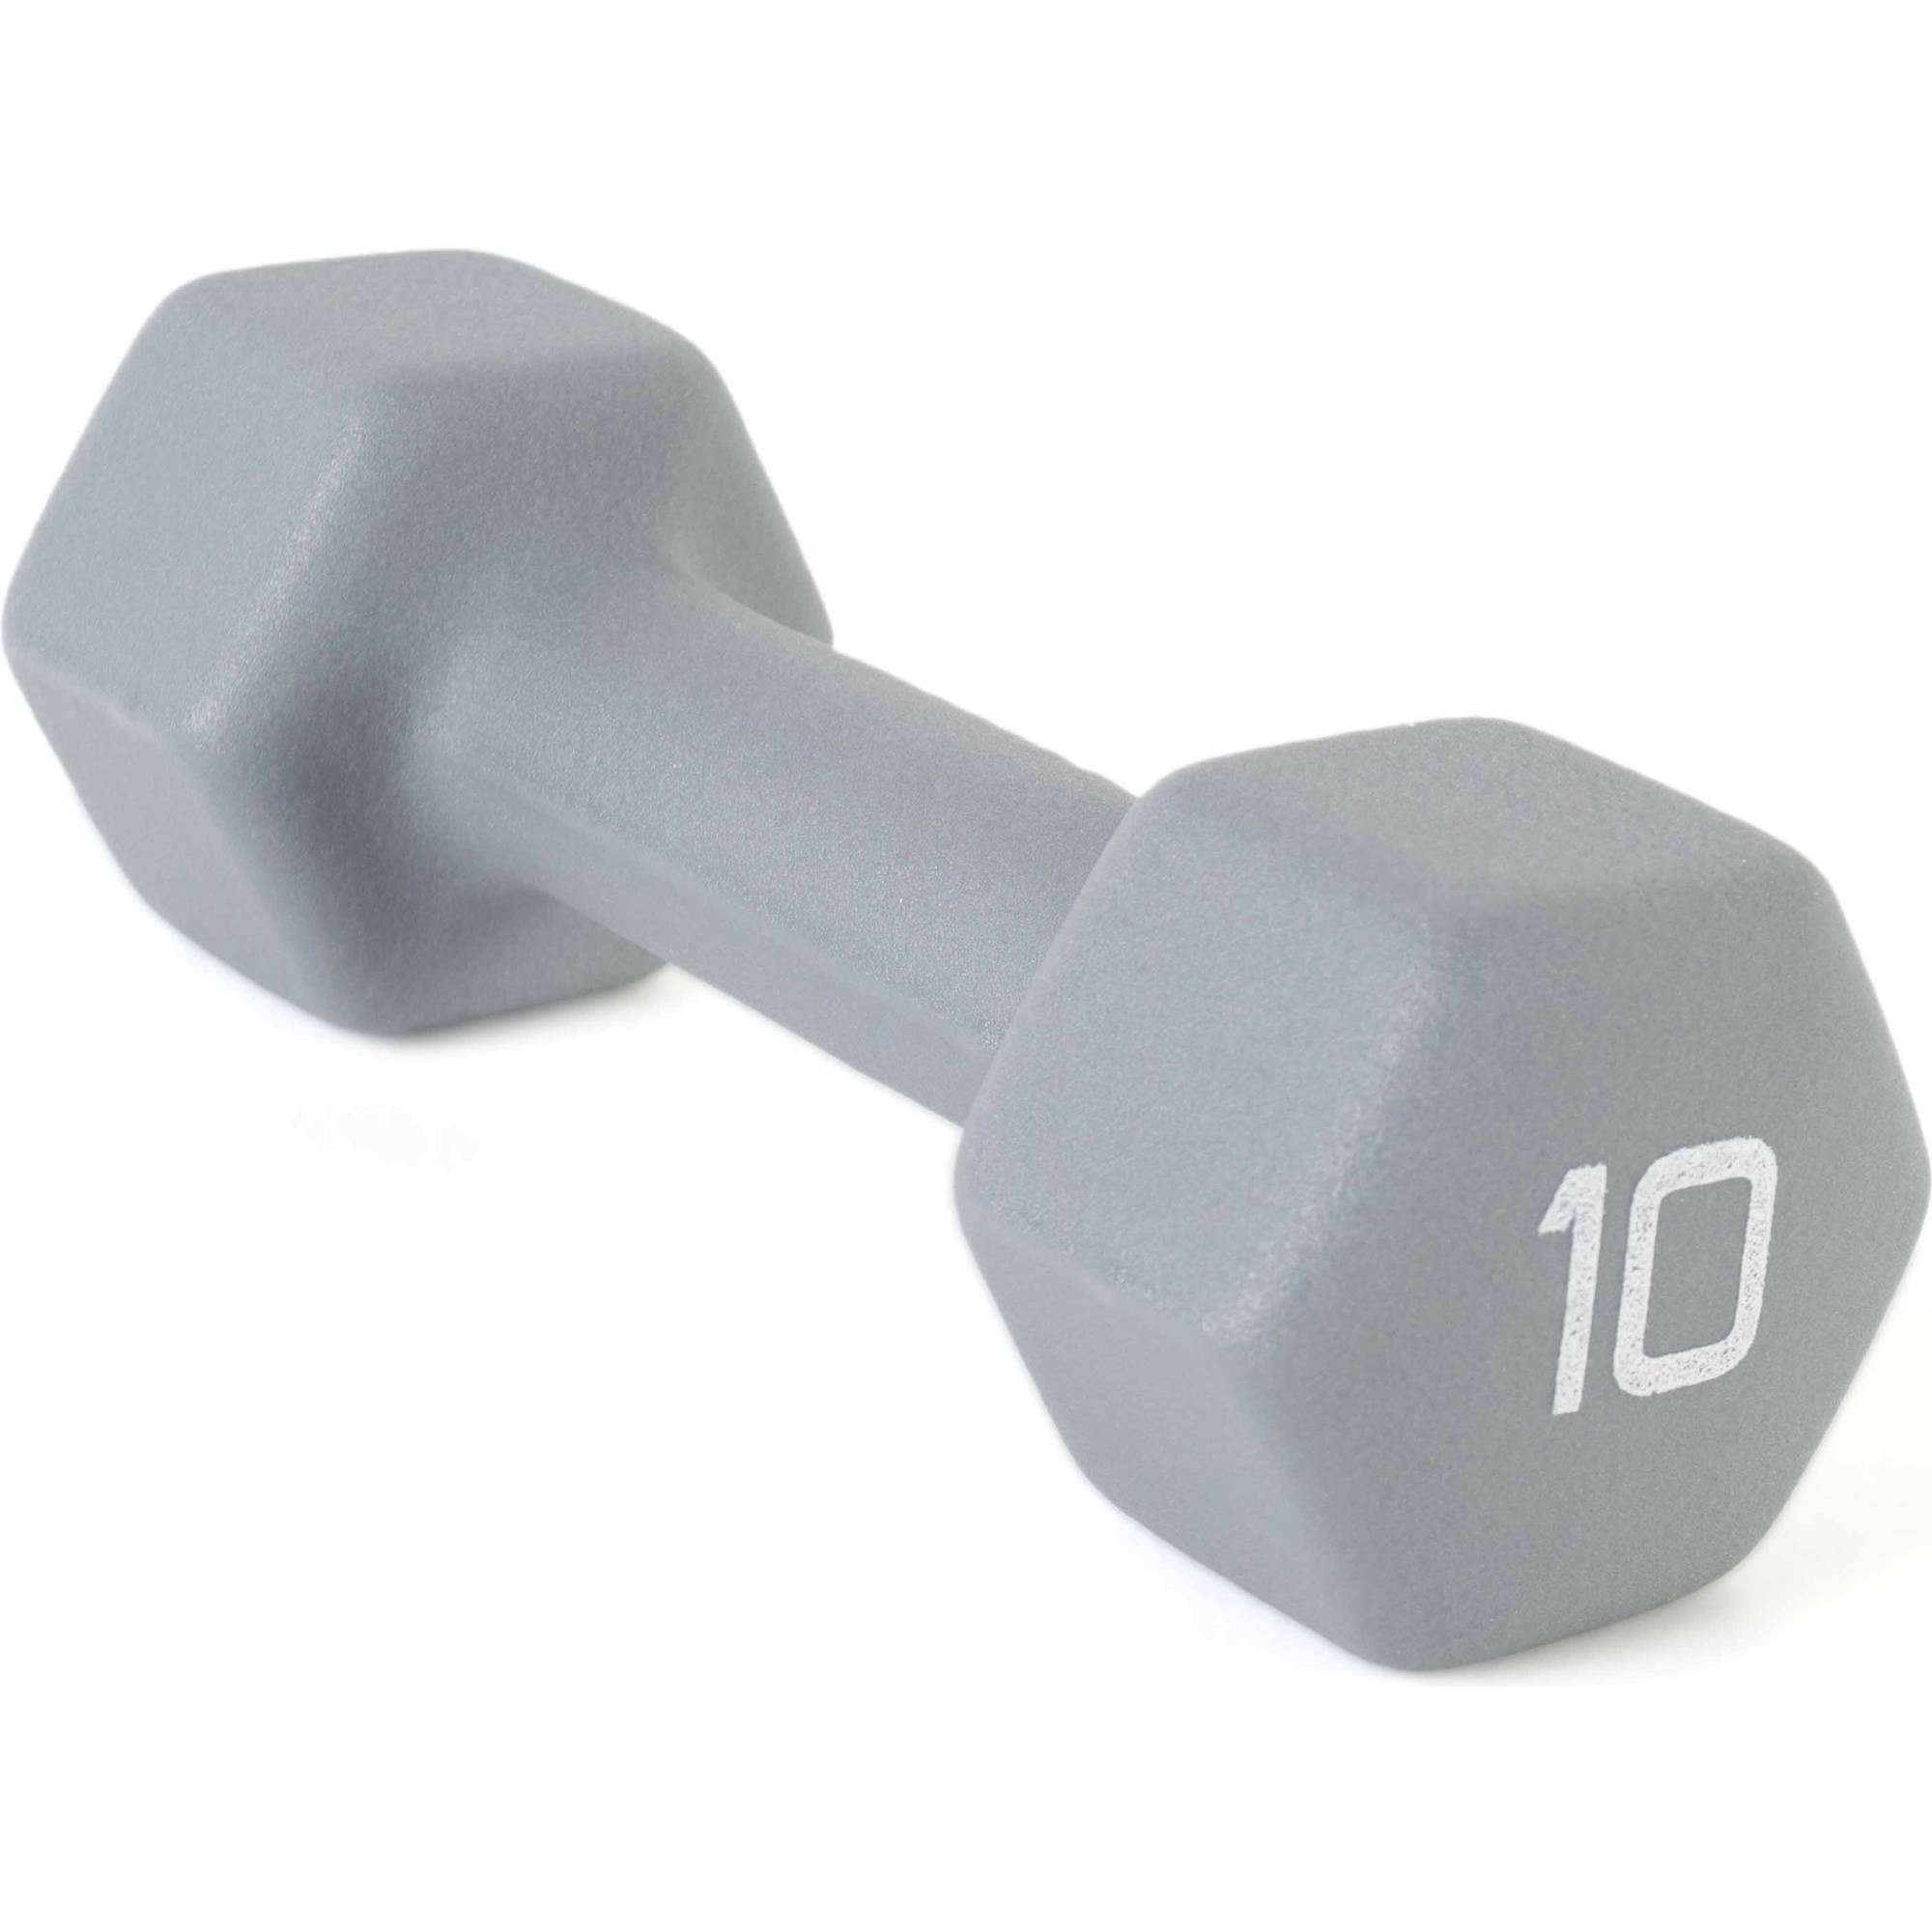 Details about   CAP Barbell Neoprene Dumbbell Weights Single Lavender 1 Pound 